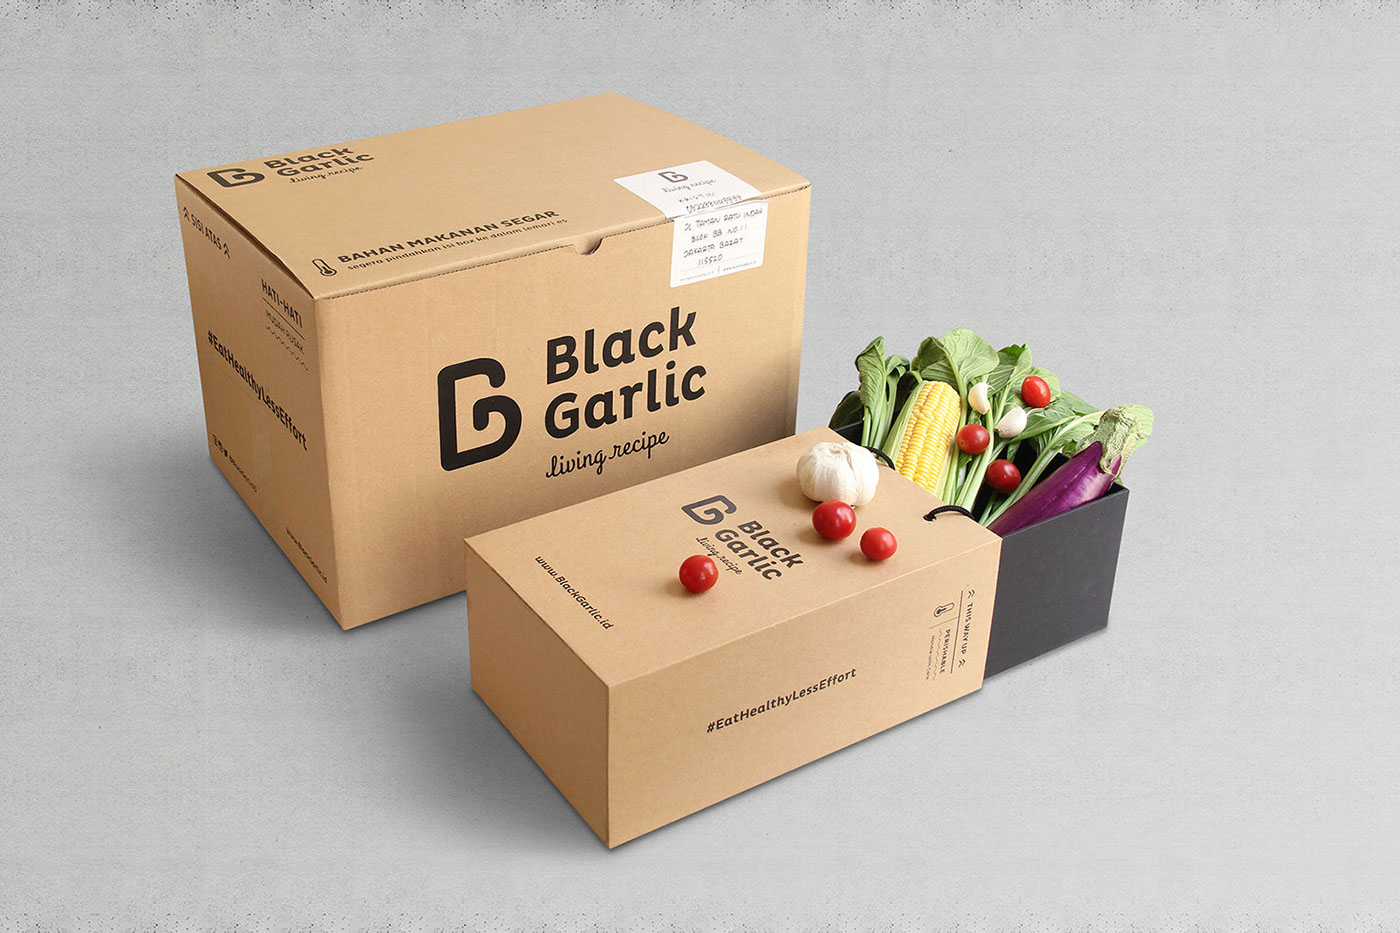 Black Garlic box packaging vegetables restaurant eatery lunch Delivery Packaging catering cooking recipe healthy lifestyle